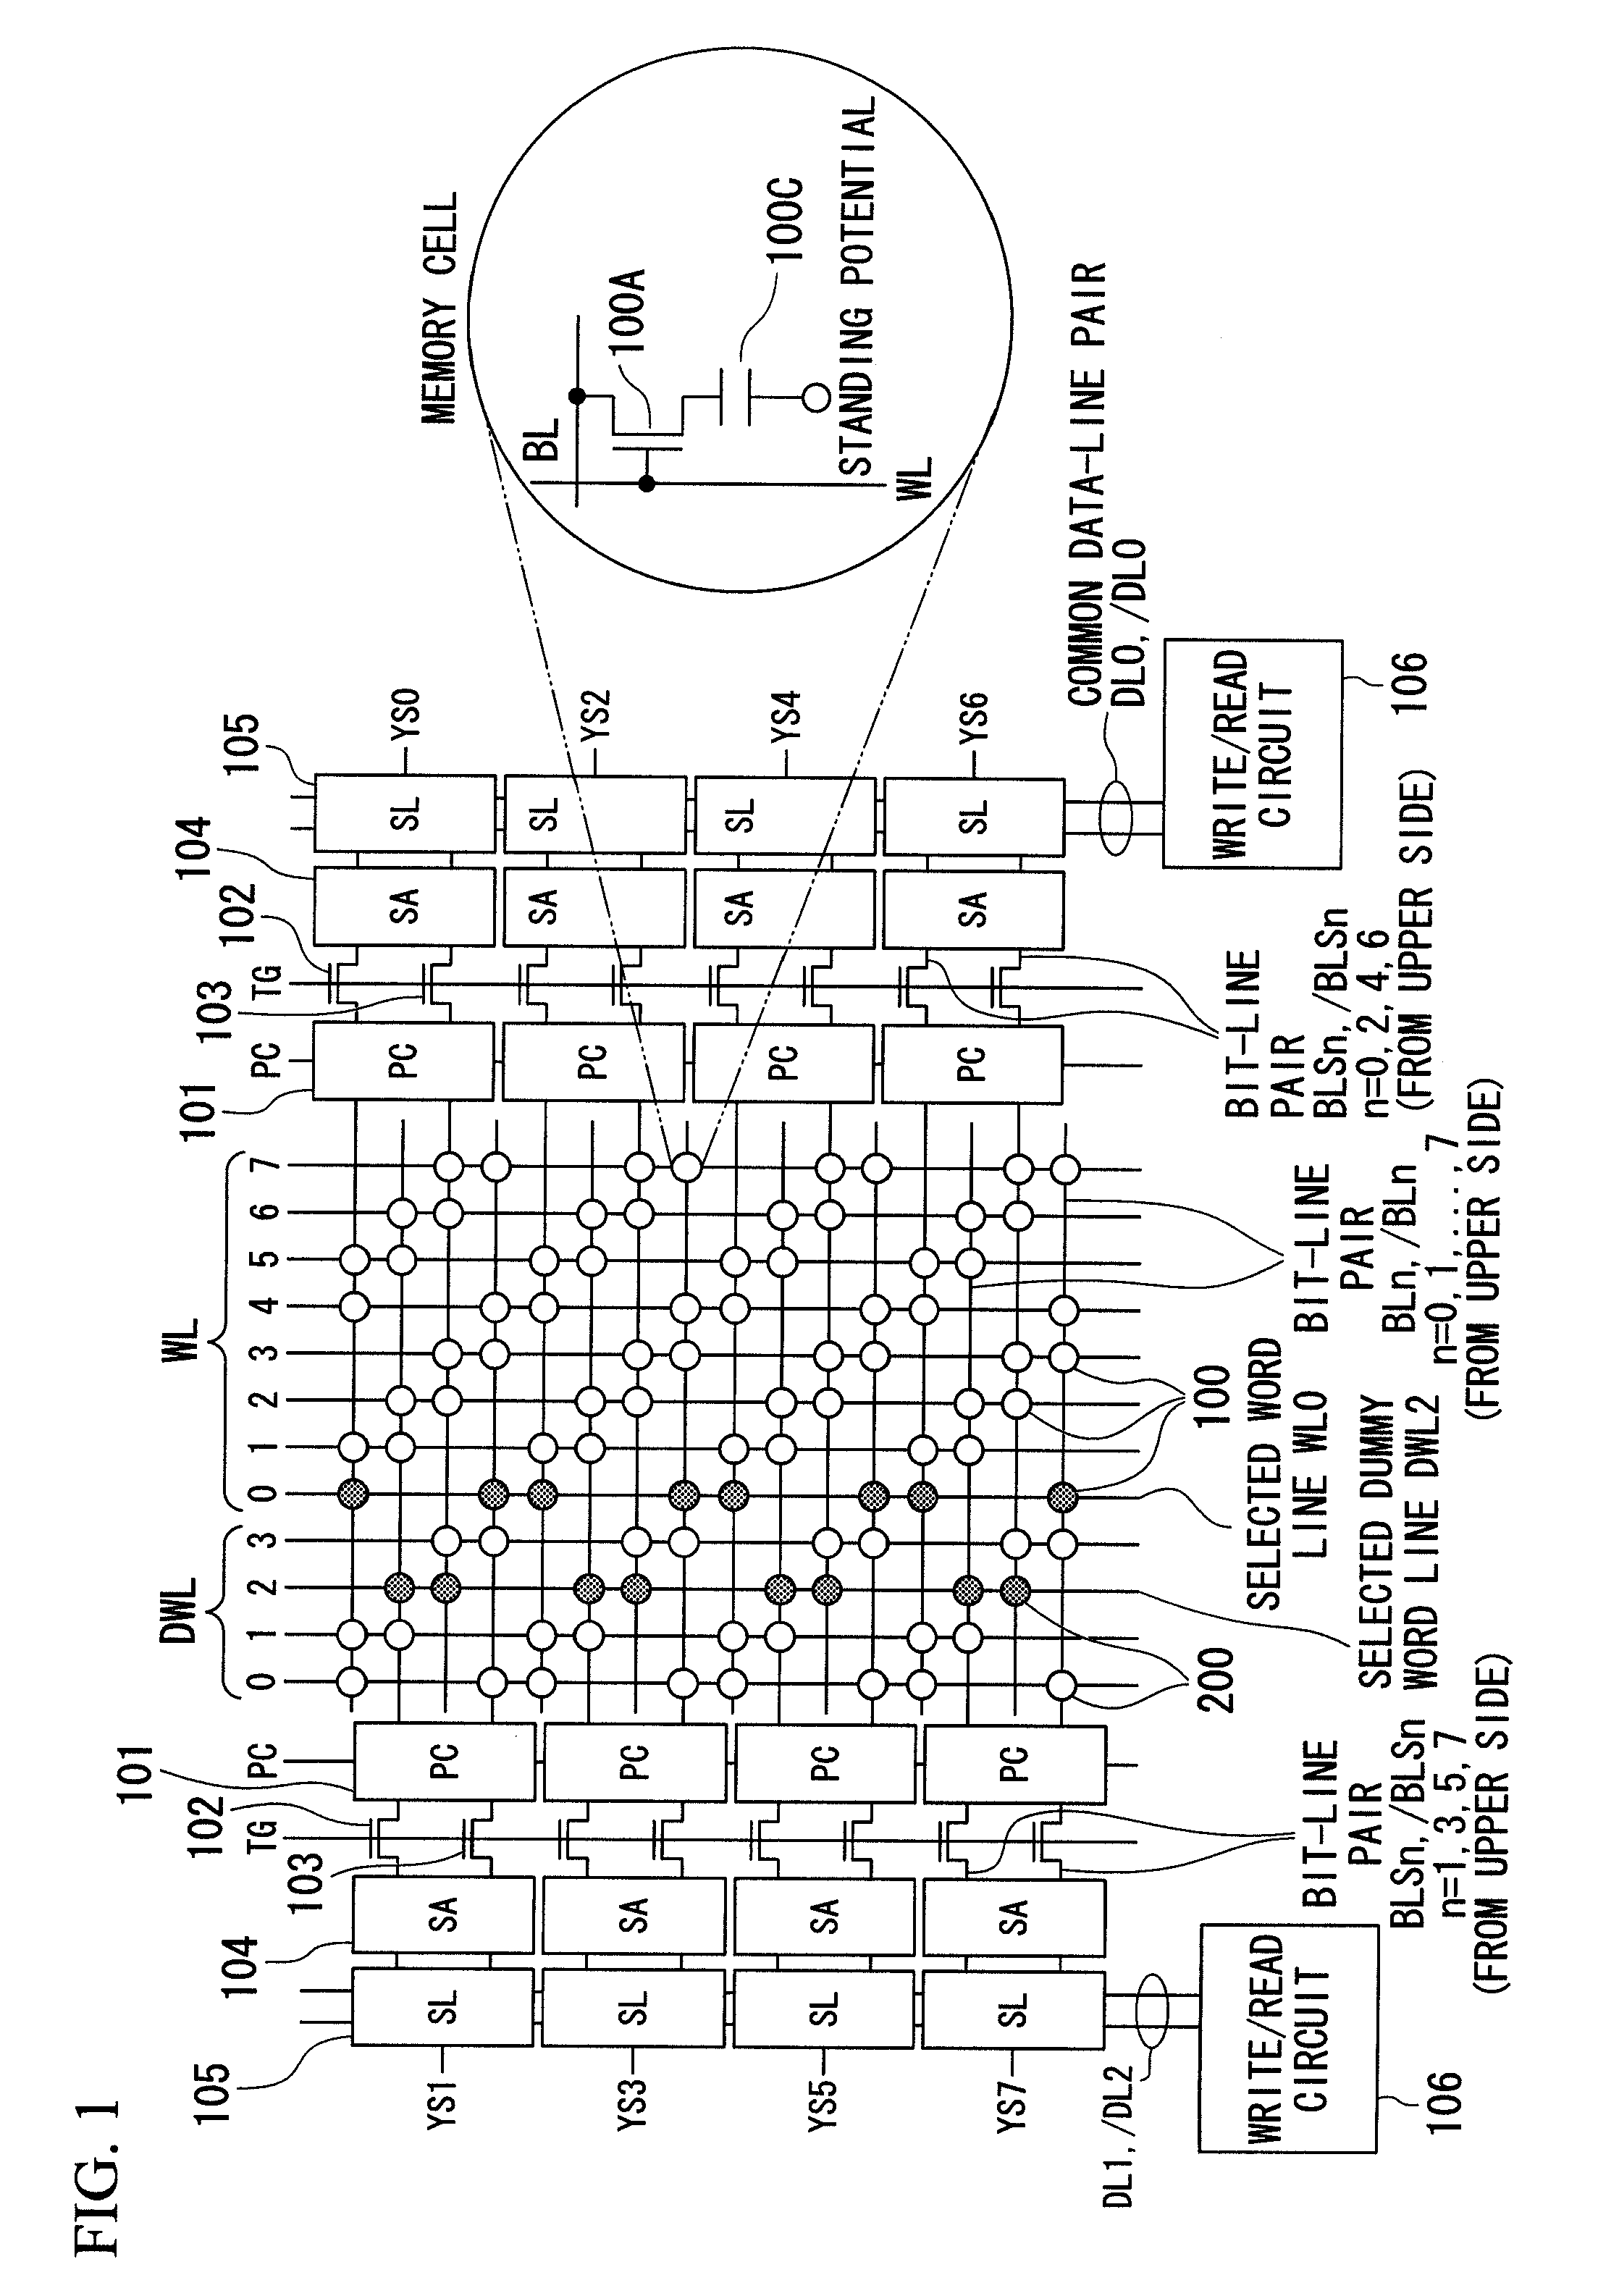 Semiconductor memory device for precharging bit lines except for specific reading and writing periods